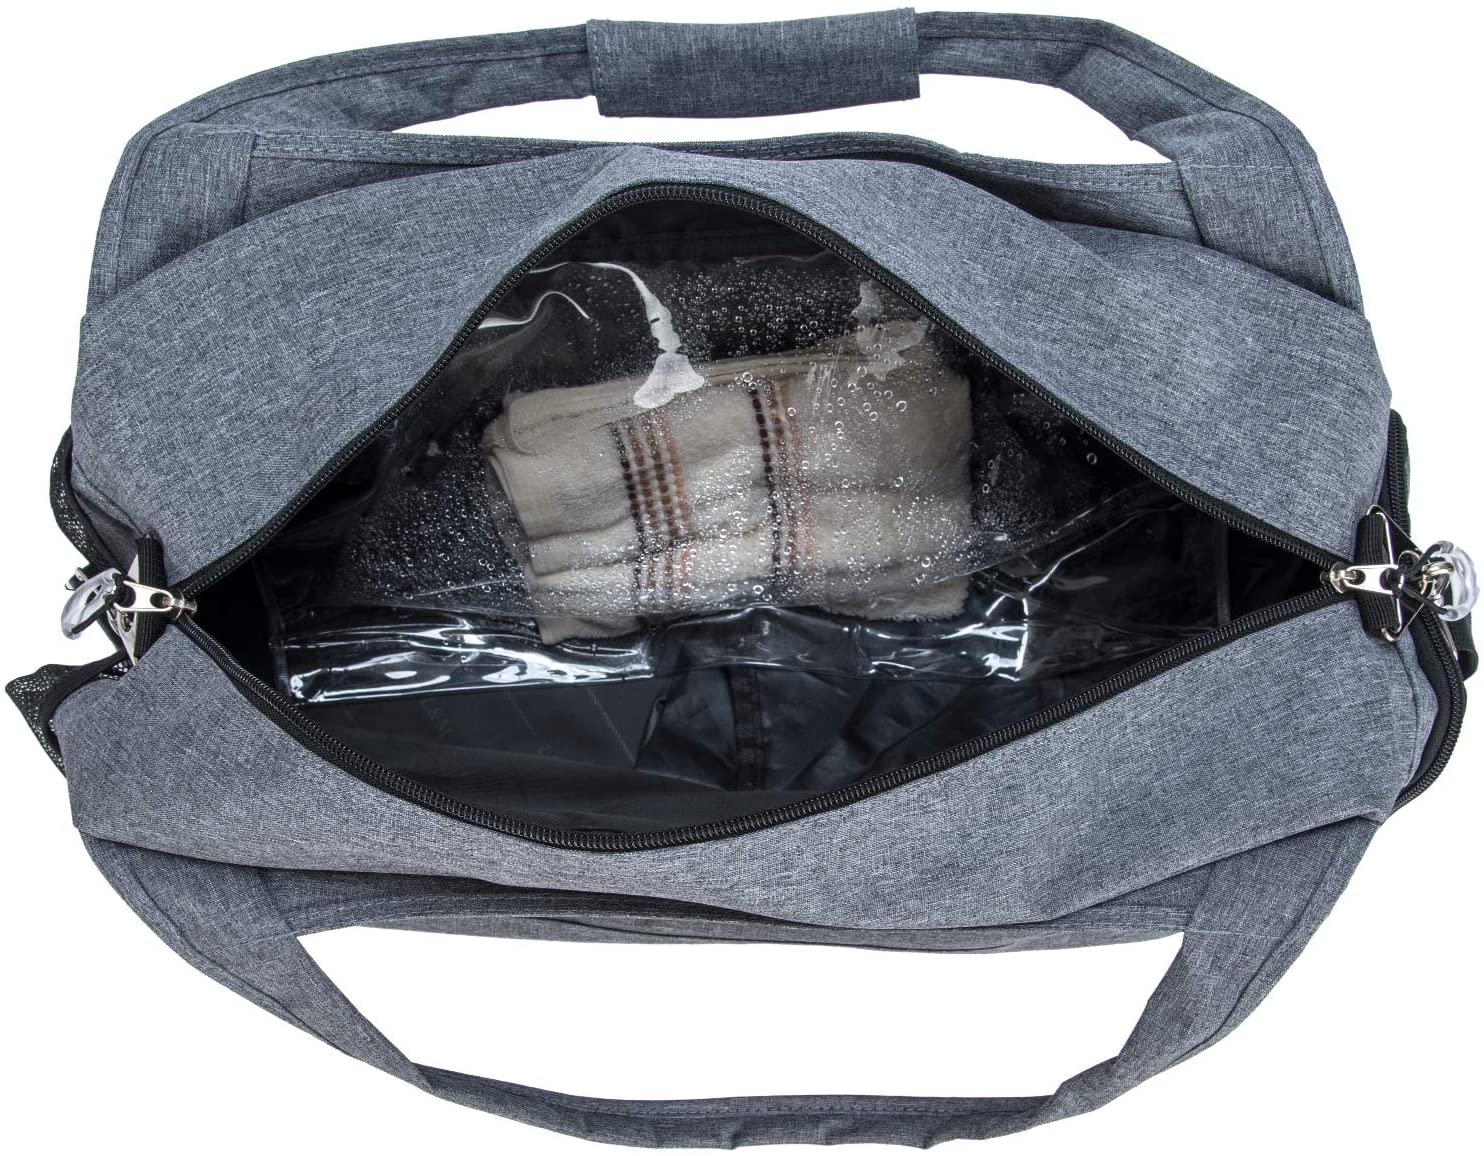 Sports Travel Duffel Bag with Shoes Pocket